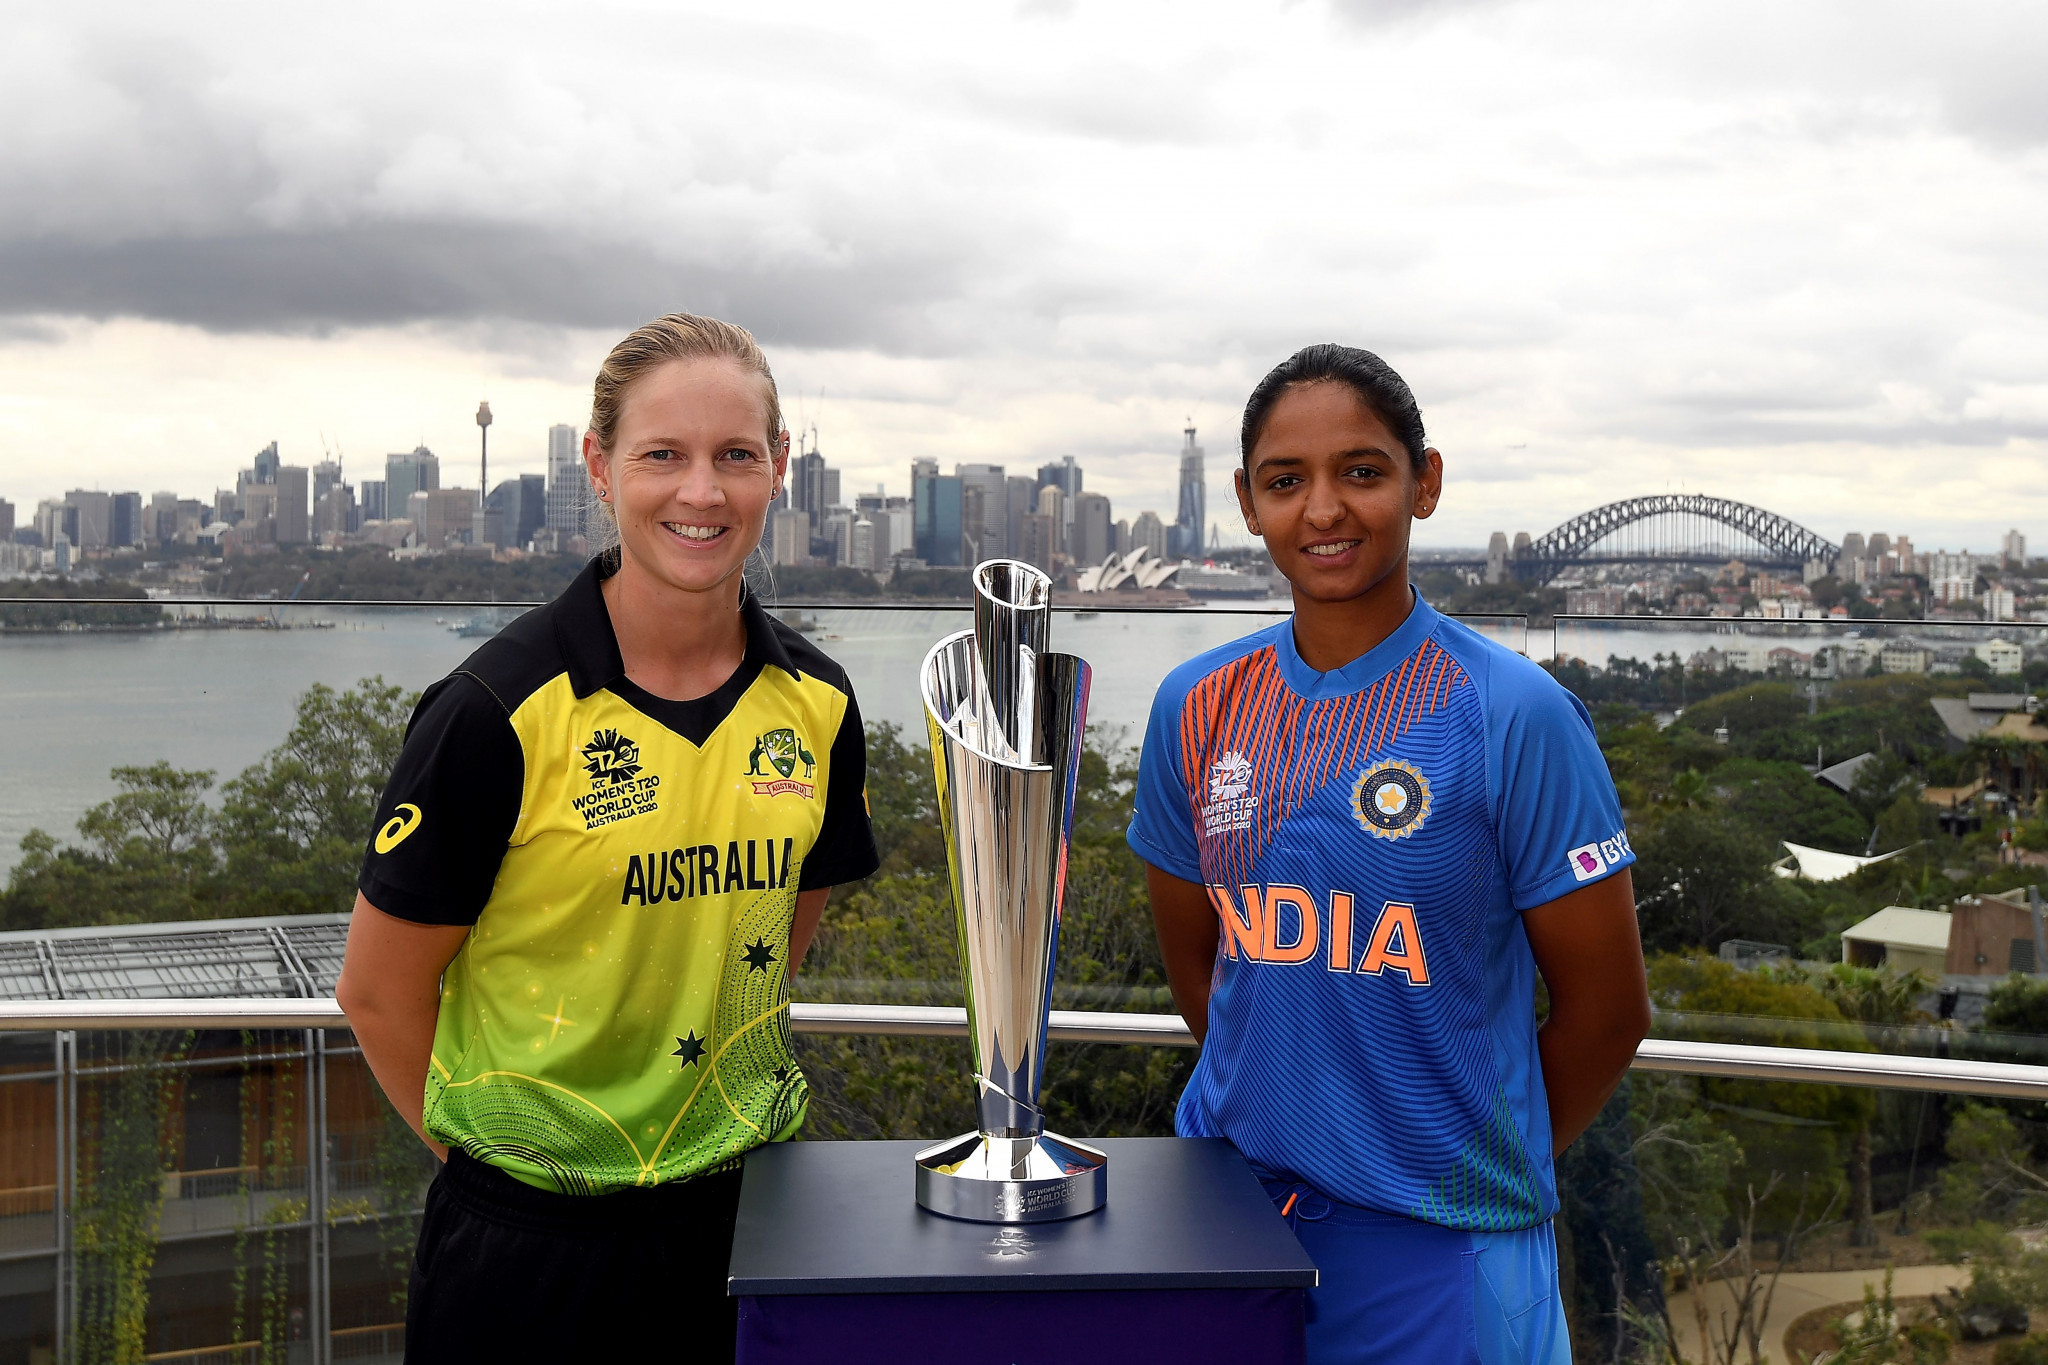 Australia will face India in the first match of the tournament ©Getty Images